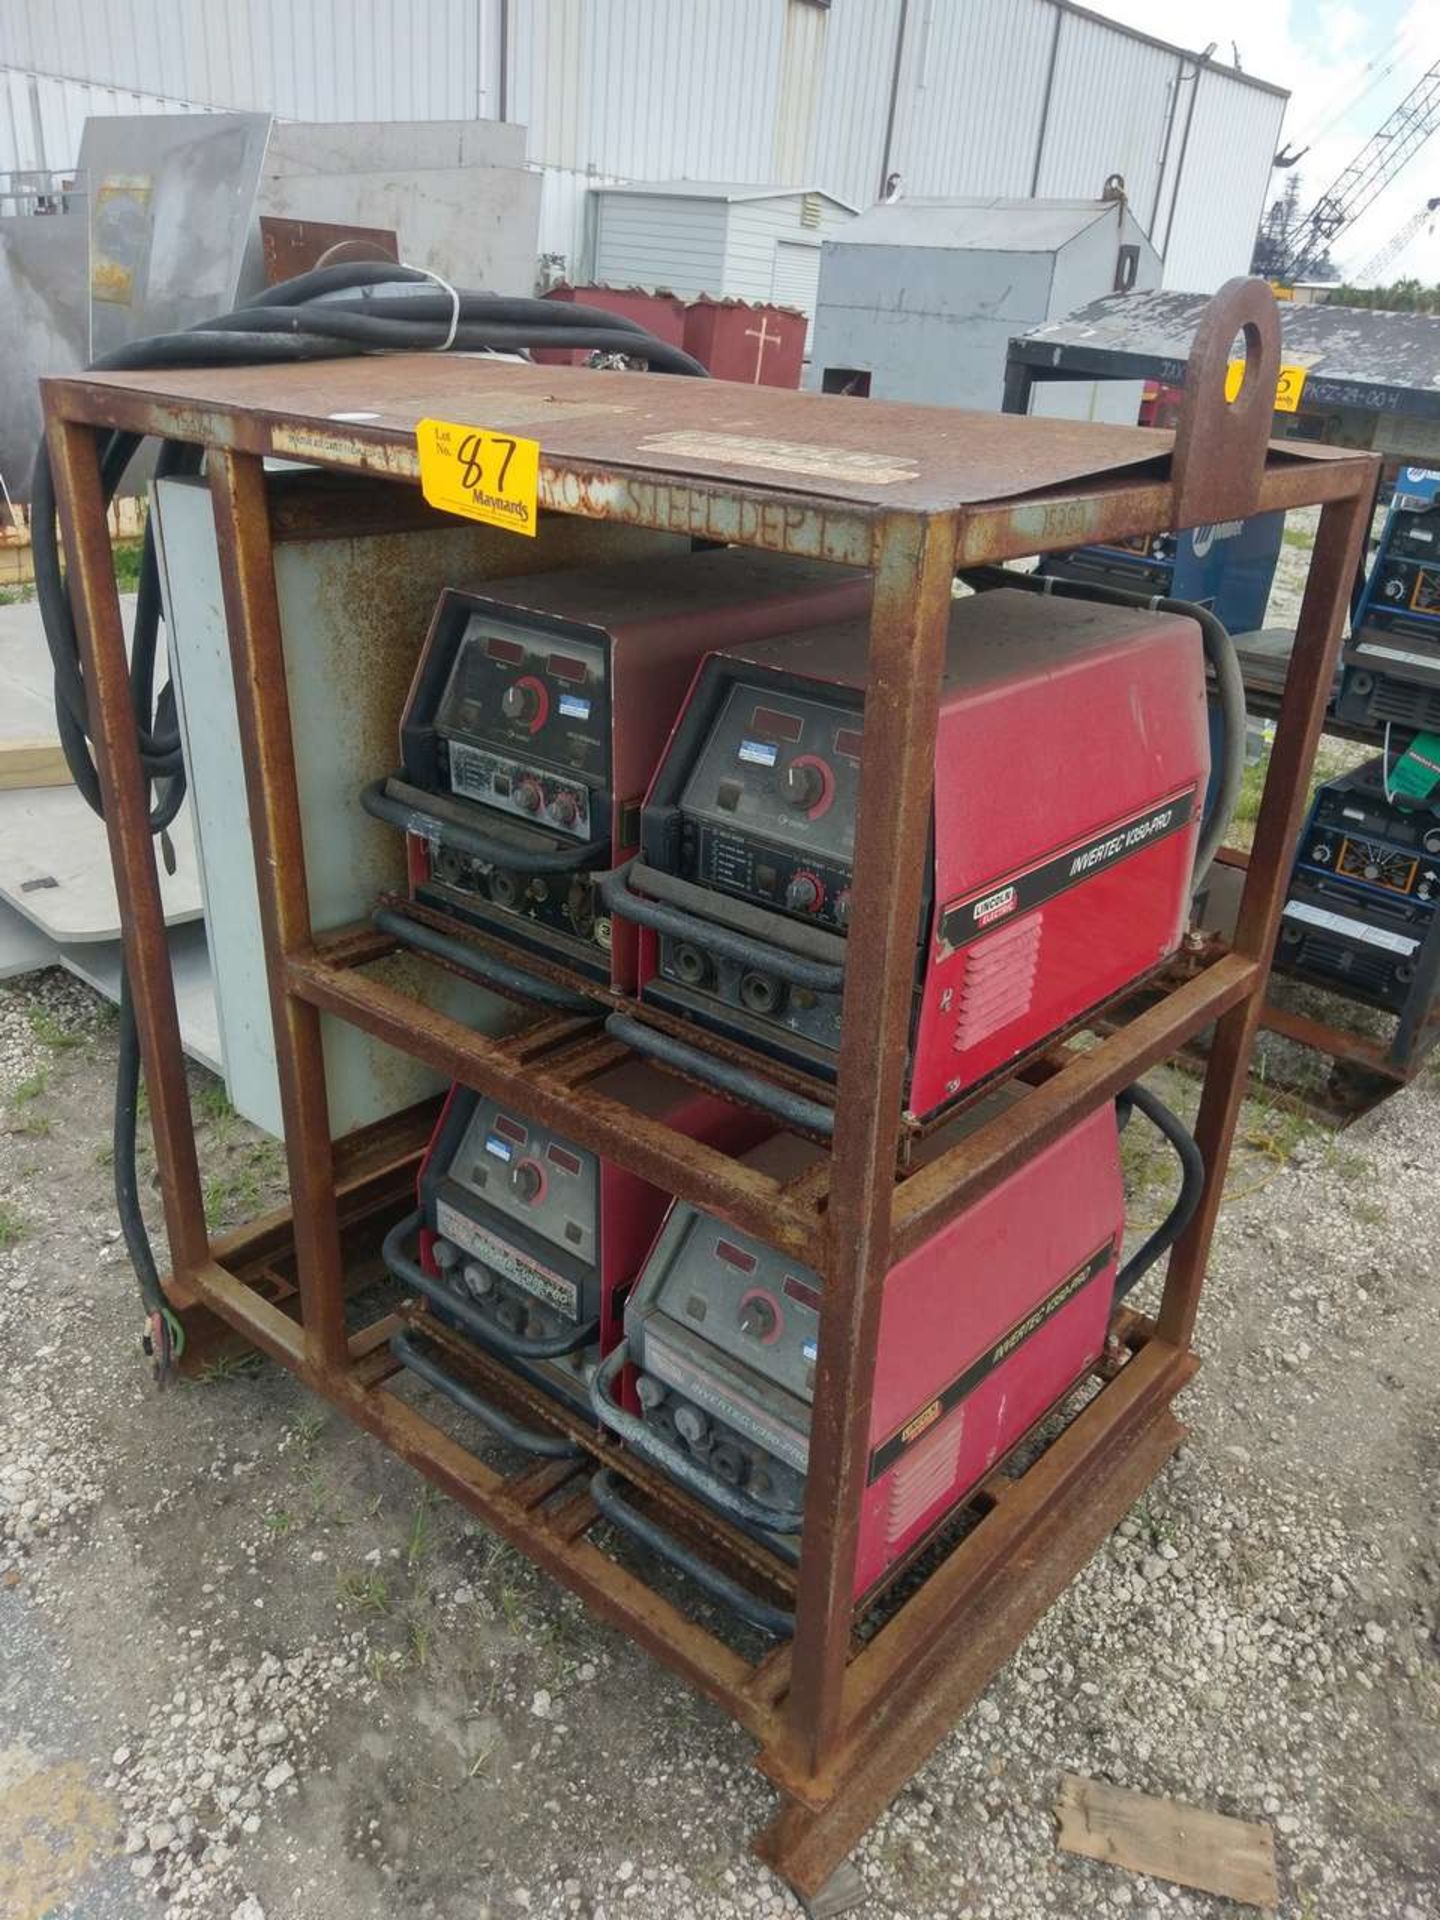 Lincoln Electric Invertec V-350 Pro (4) Welding Power Source